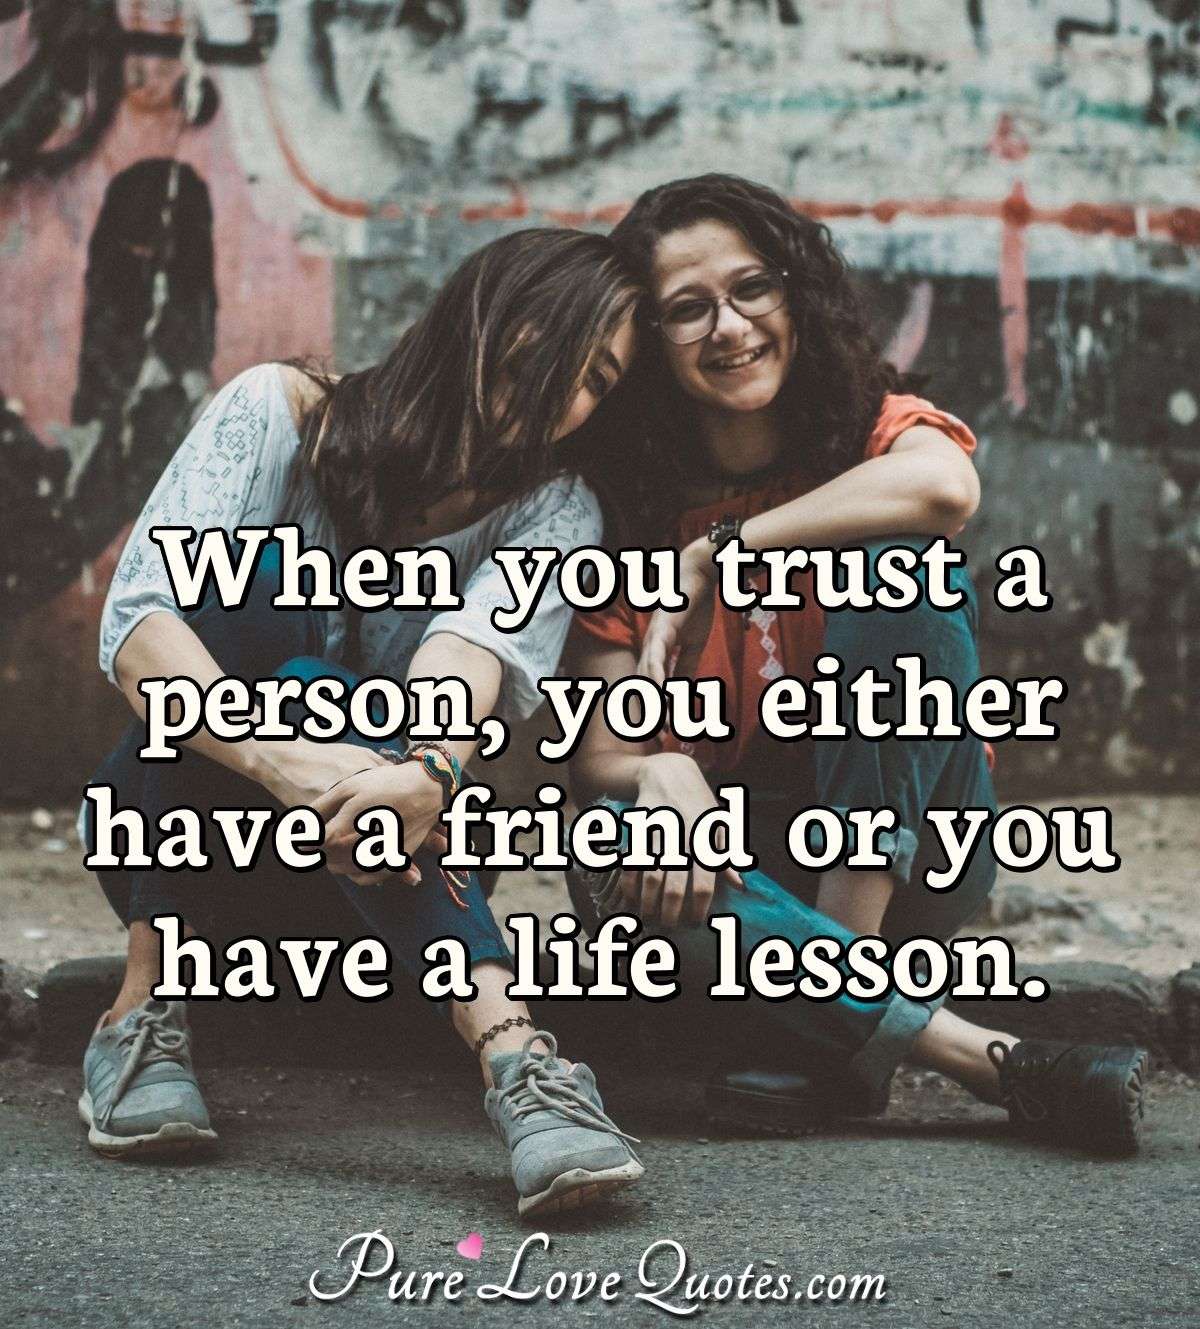 When you trust a person, you either have a friend or you have a life lesson. - Anonymous